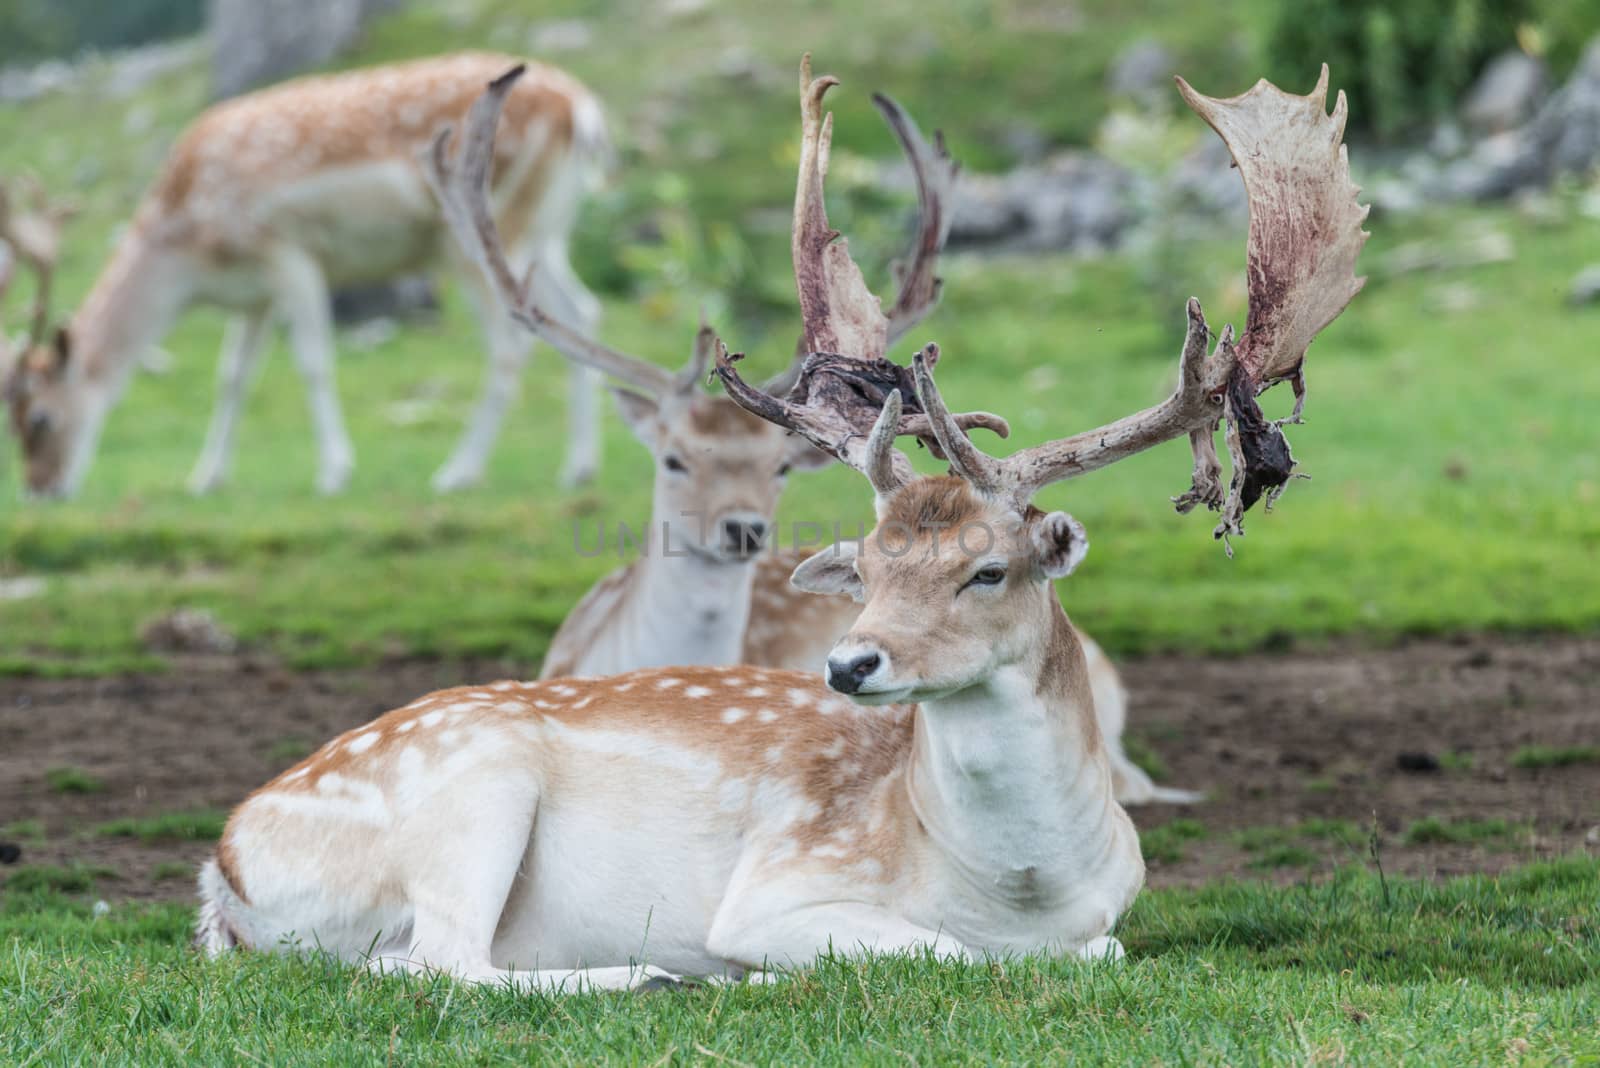 Male deer resting with a pack of deers on a grass field